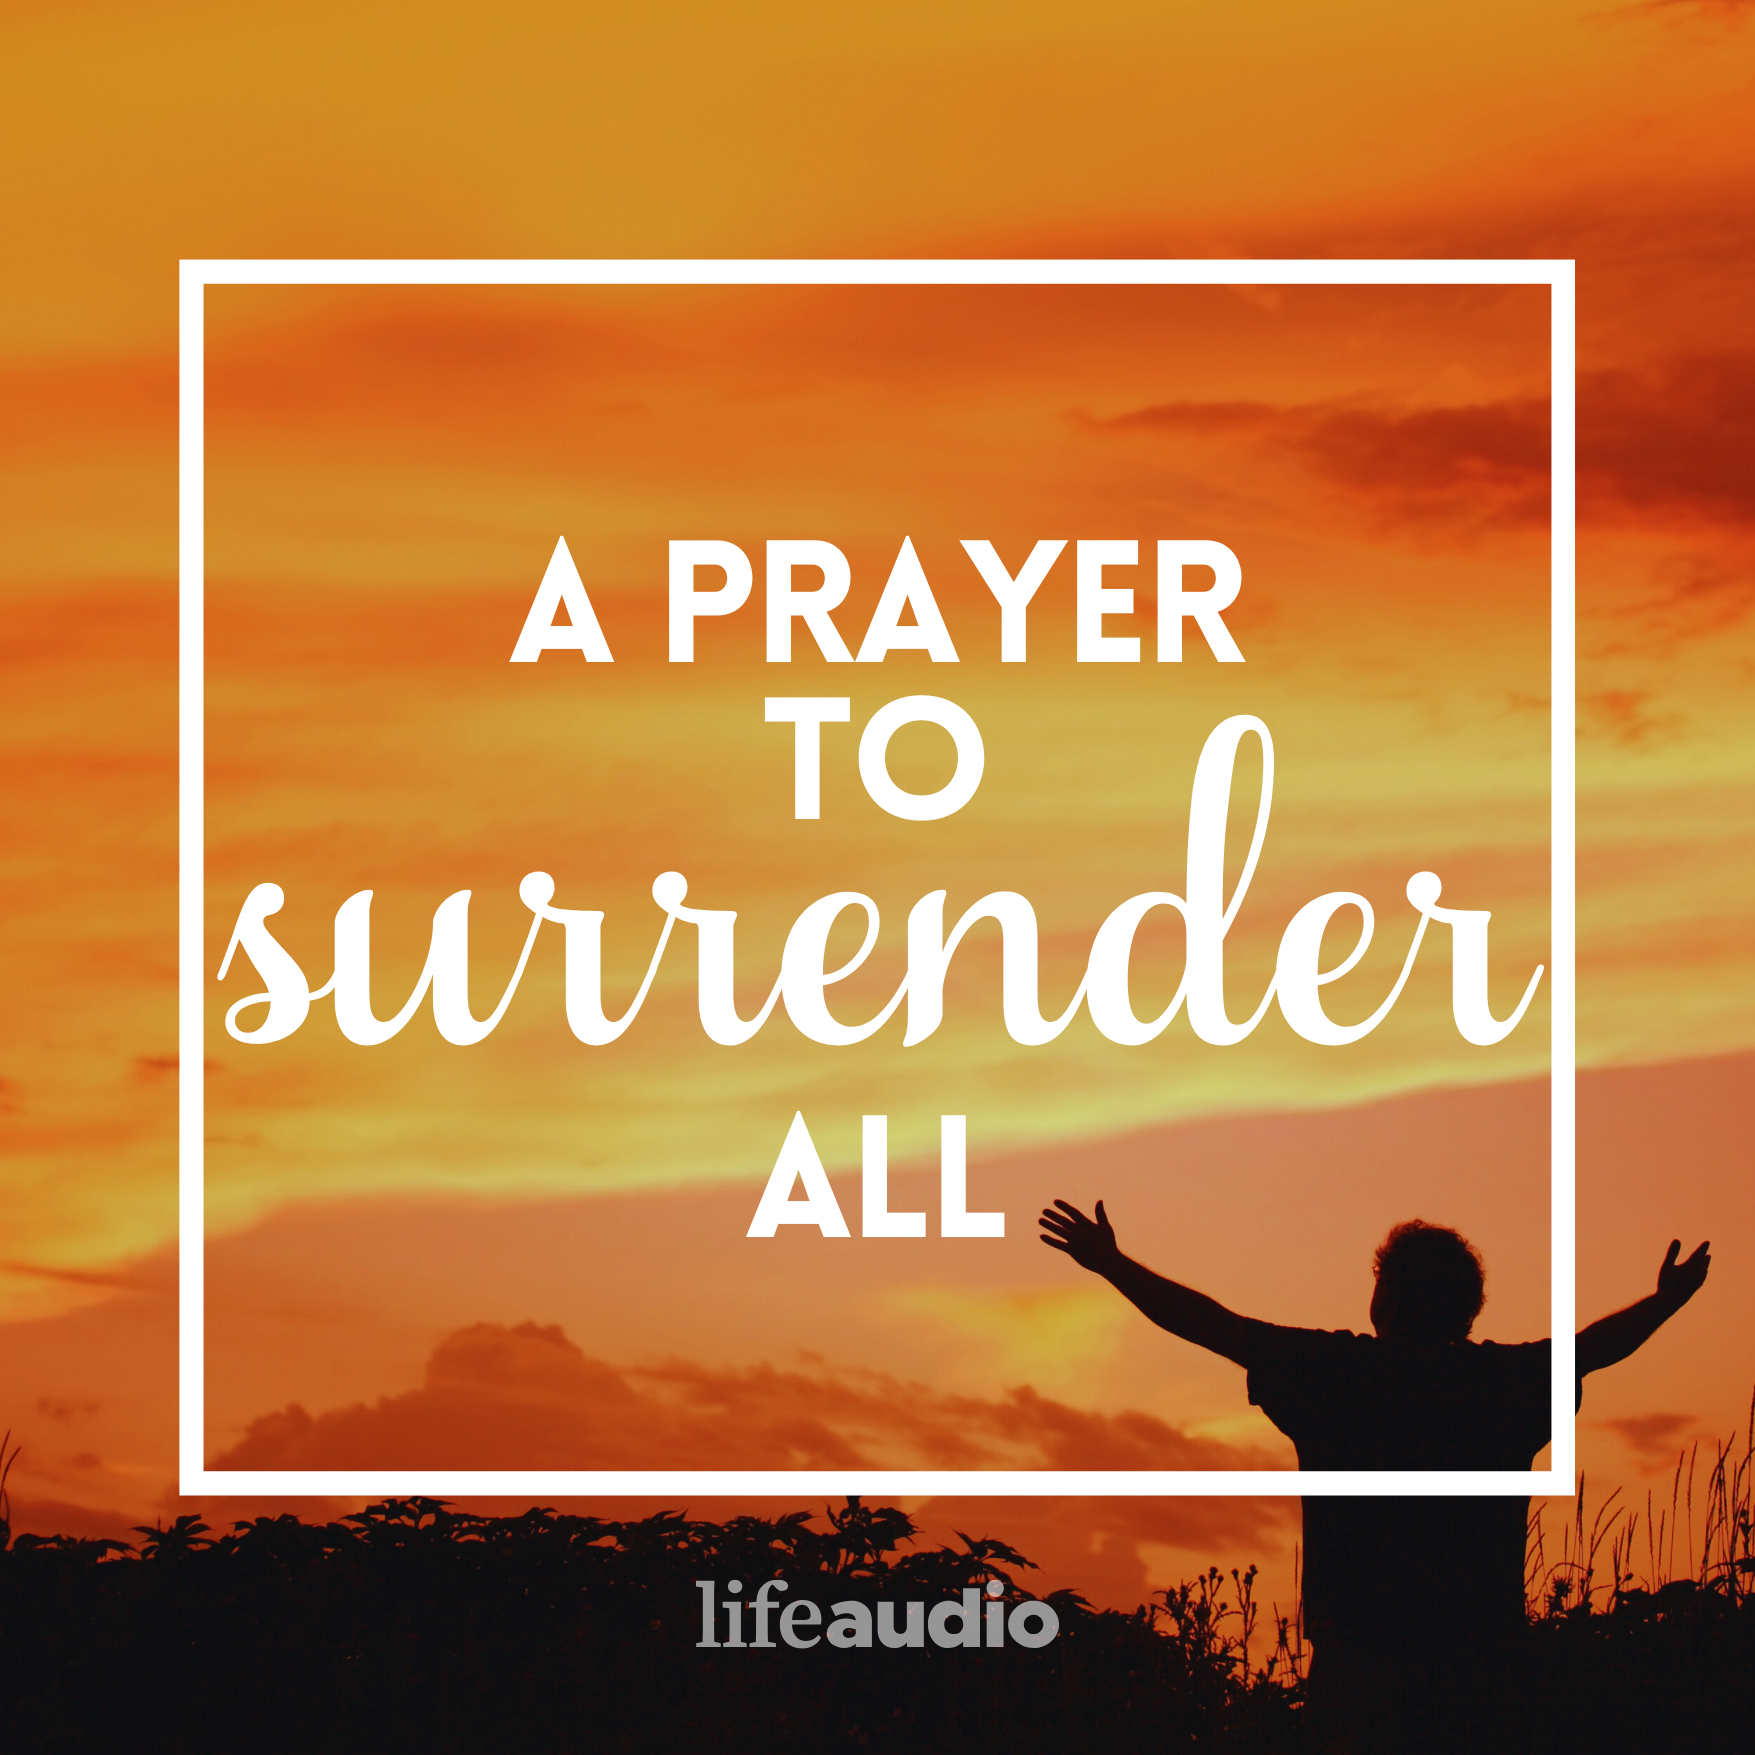 A Prayer to Surrender All